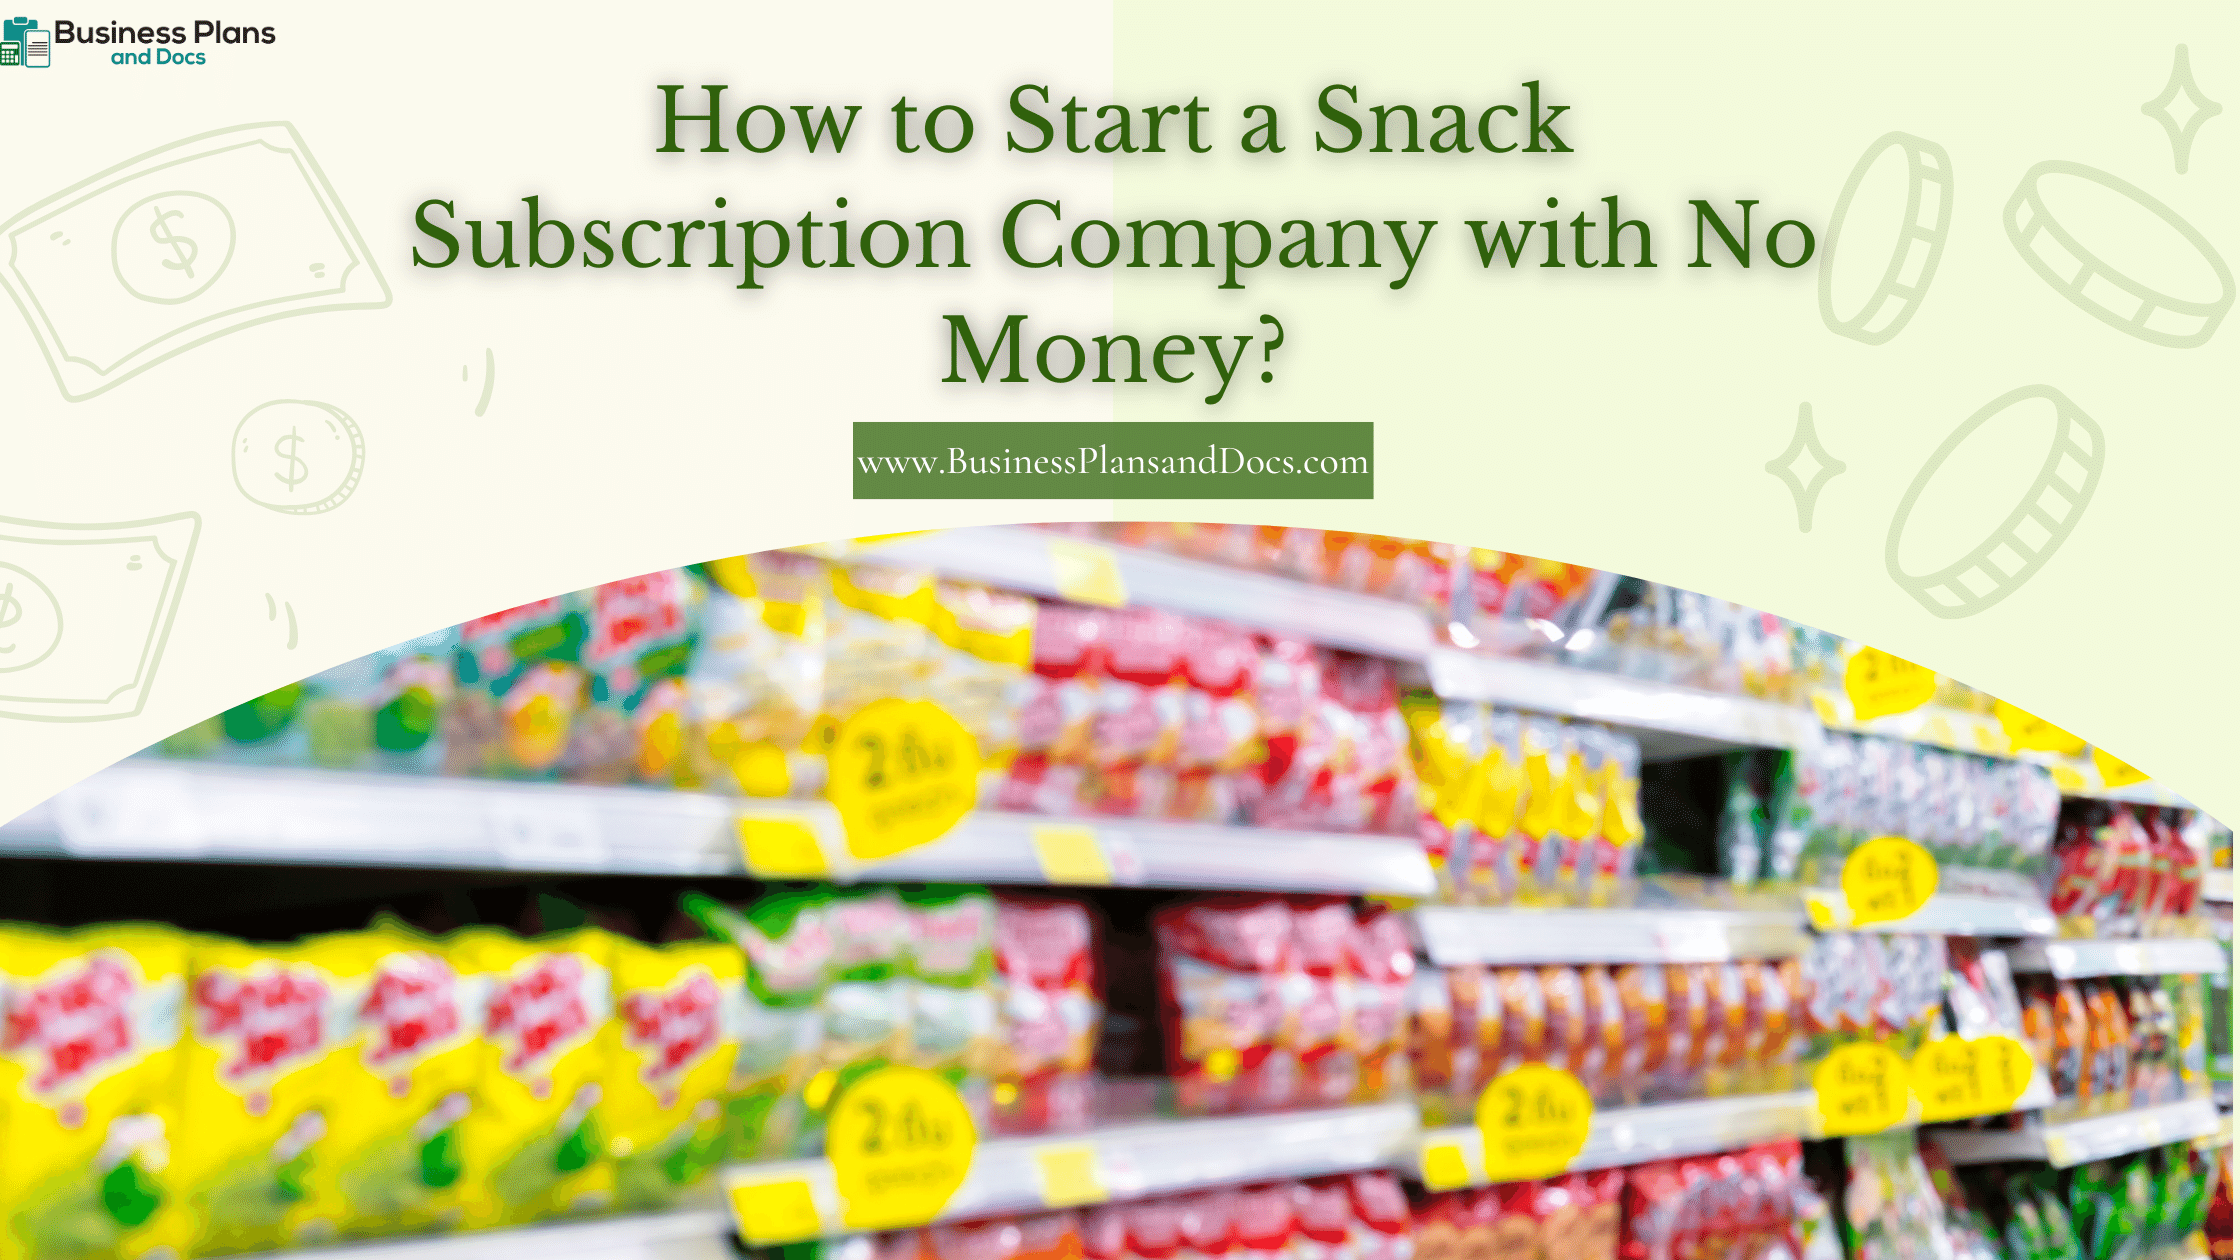 How to Start a Snack Subscription Company with No Money?